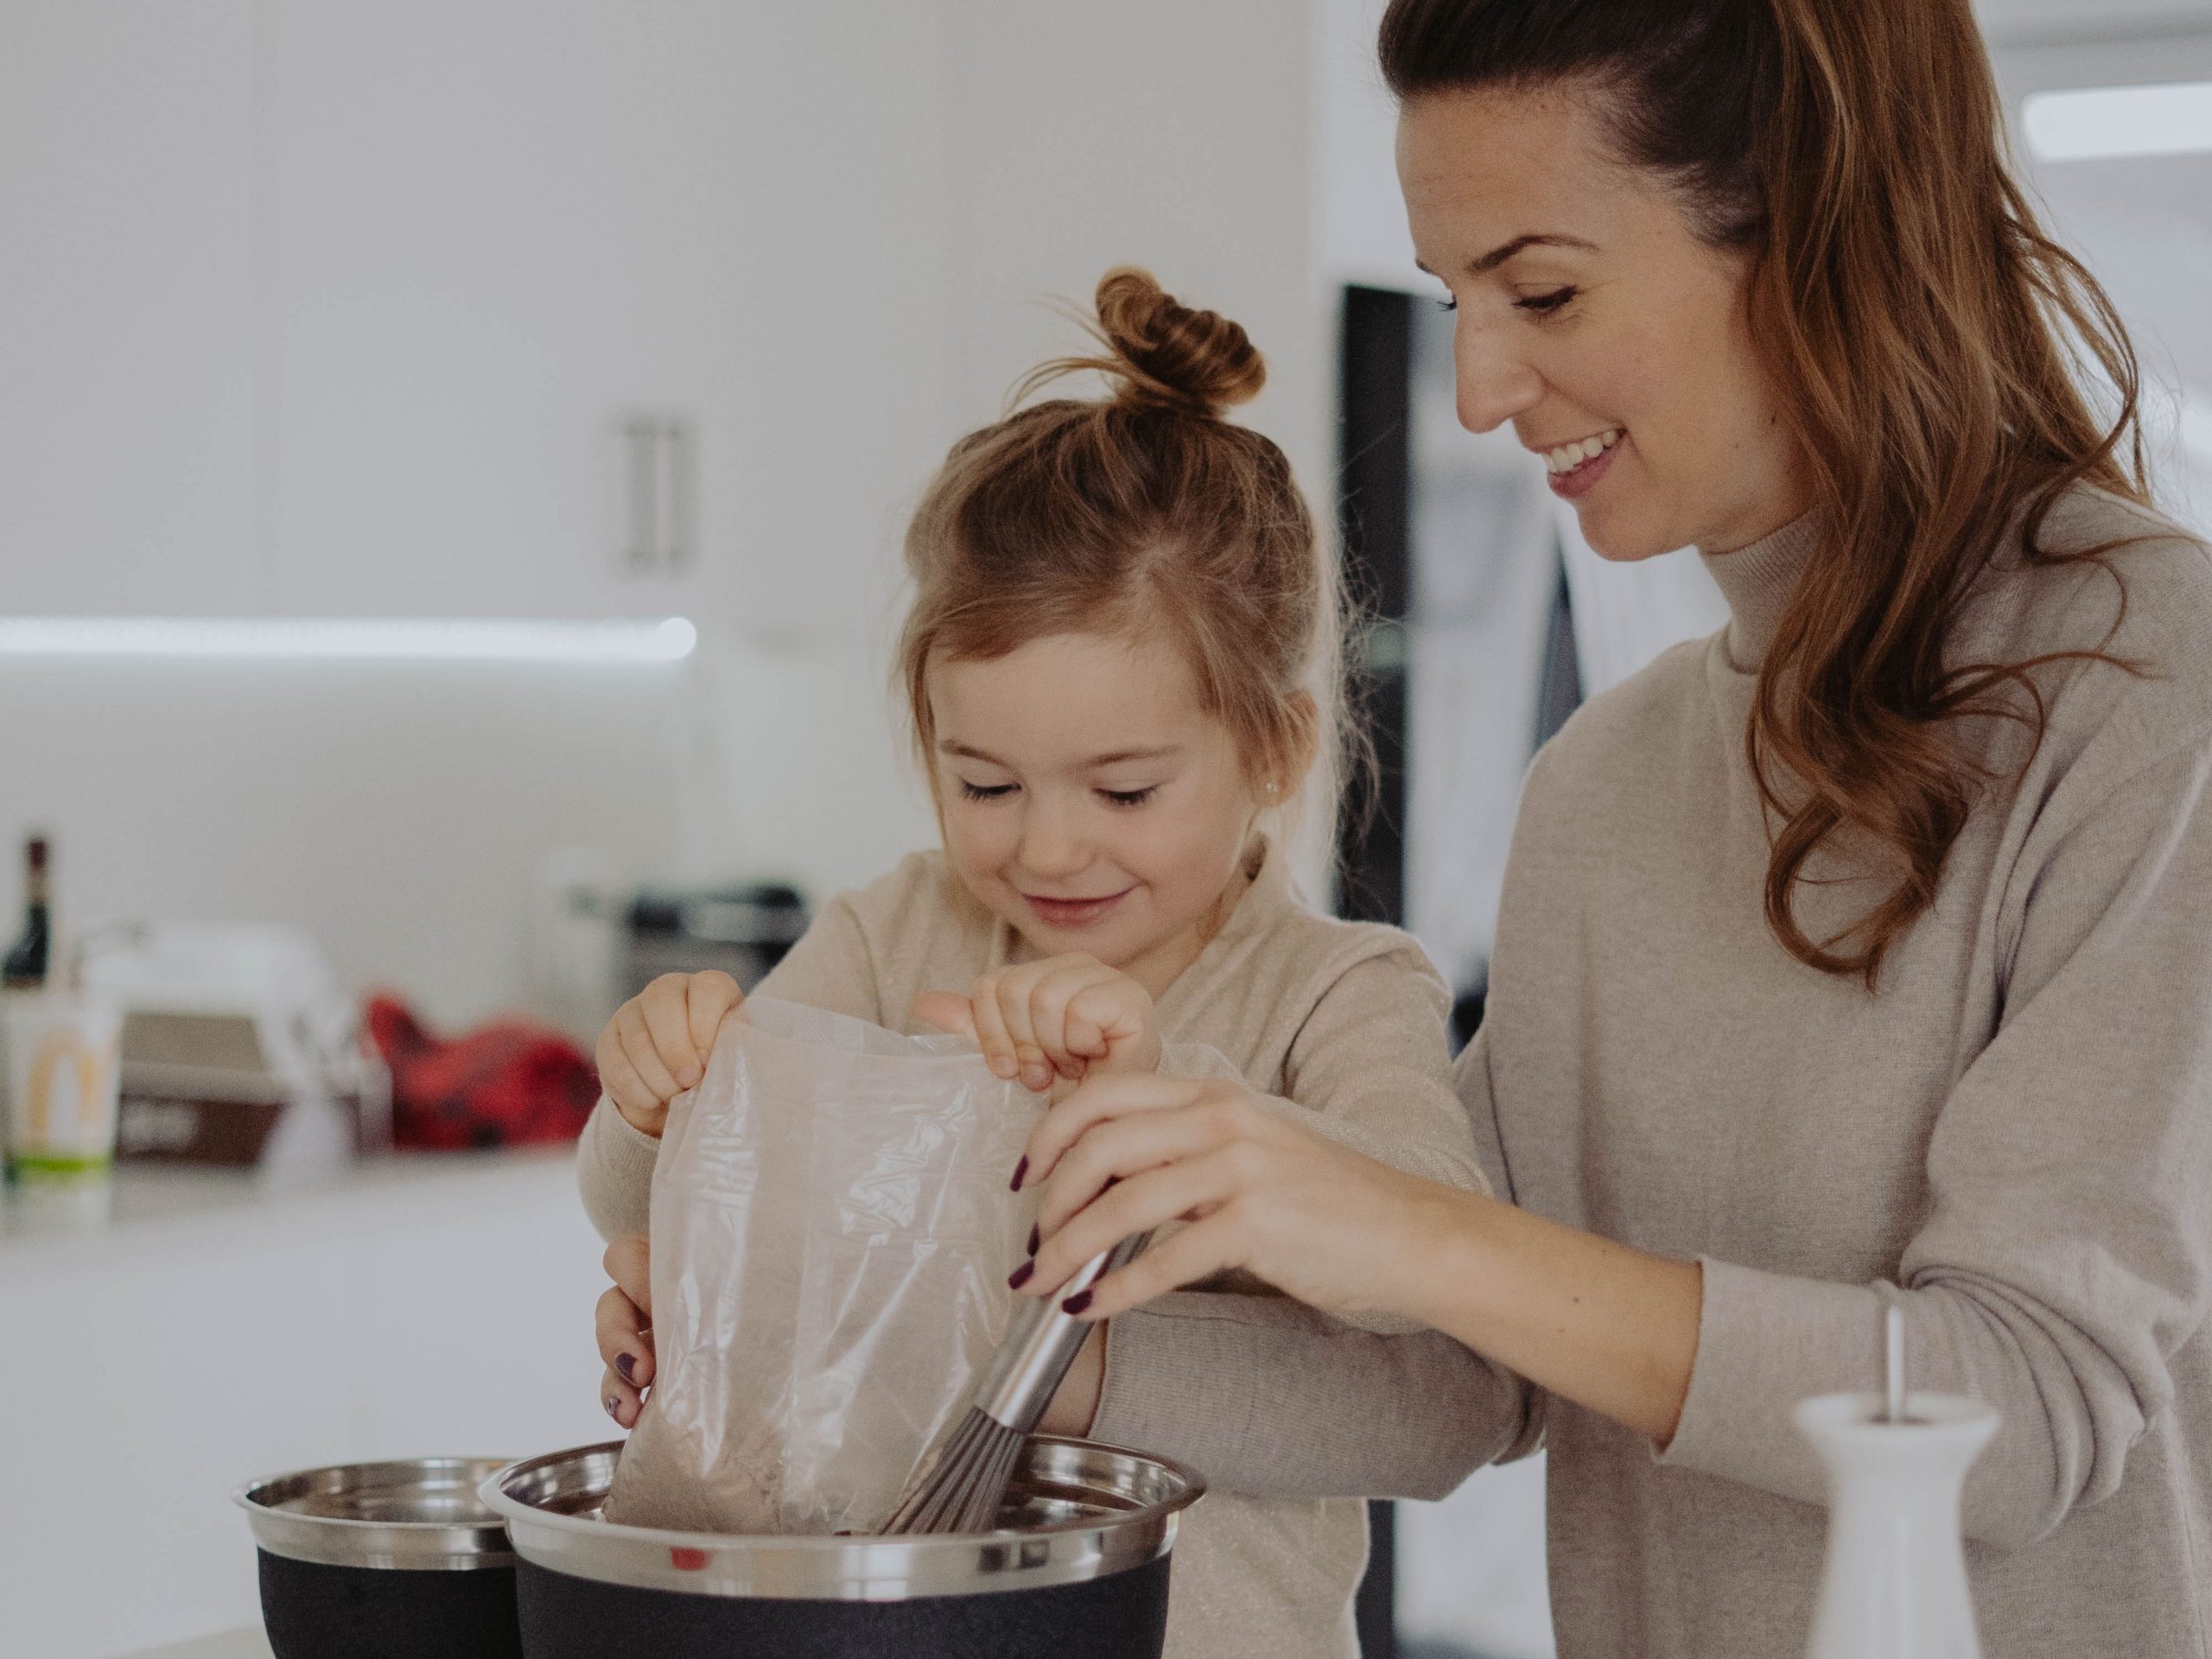 Cooking wholesome food for children